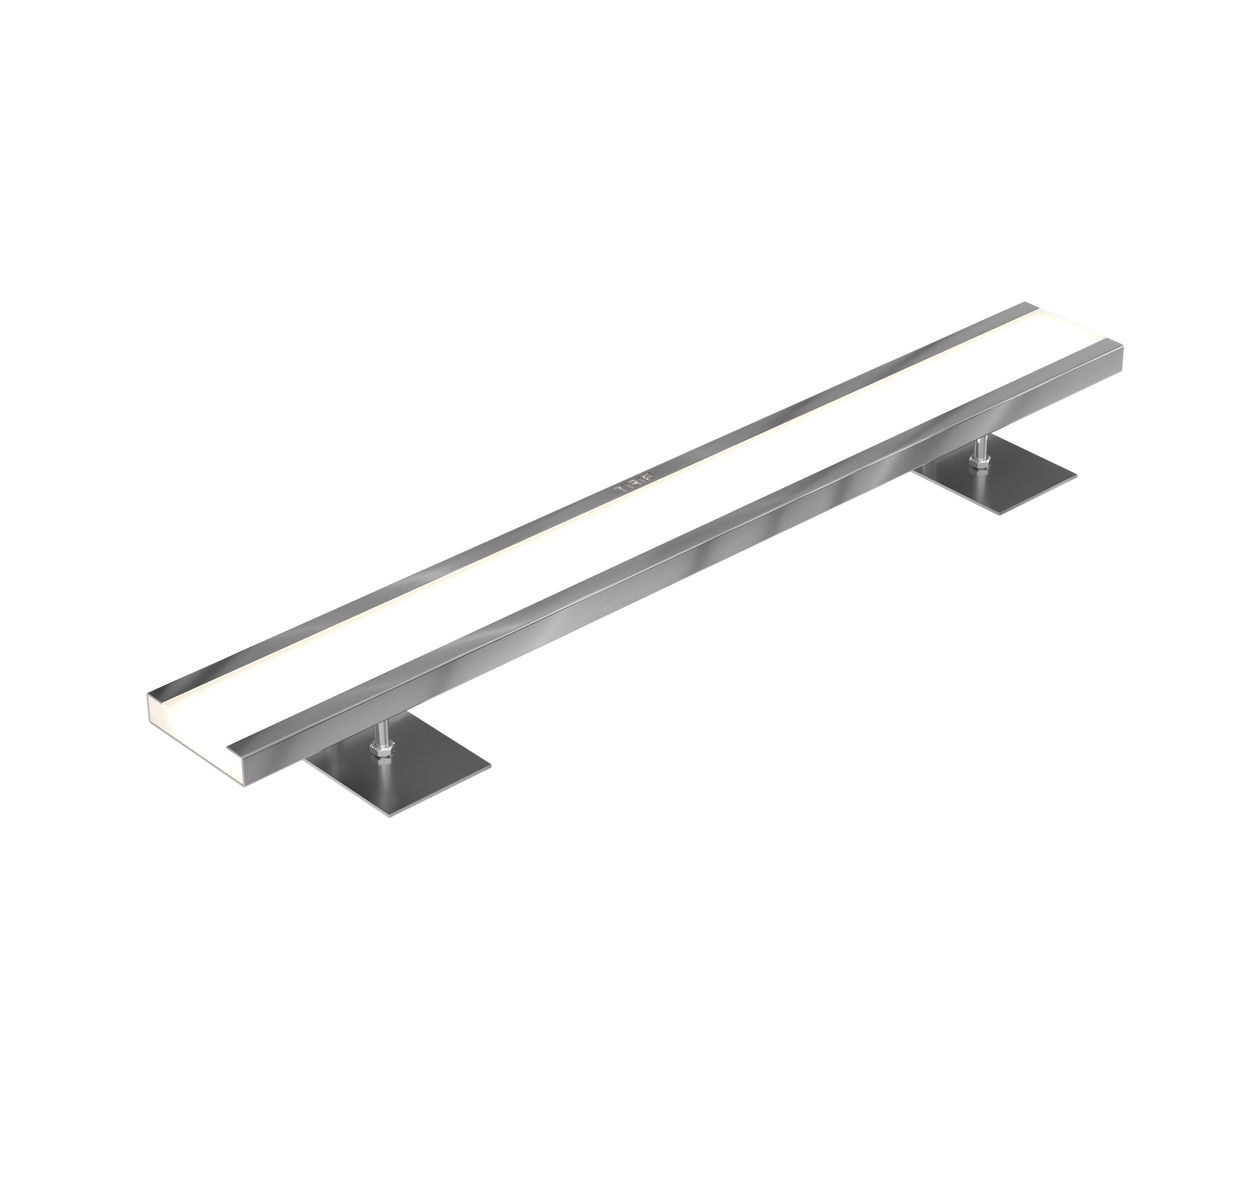 TRIF LANE BAND Custom-Design Luminaires For Specific Projects